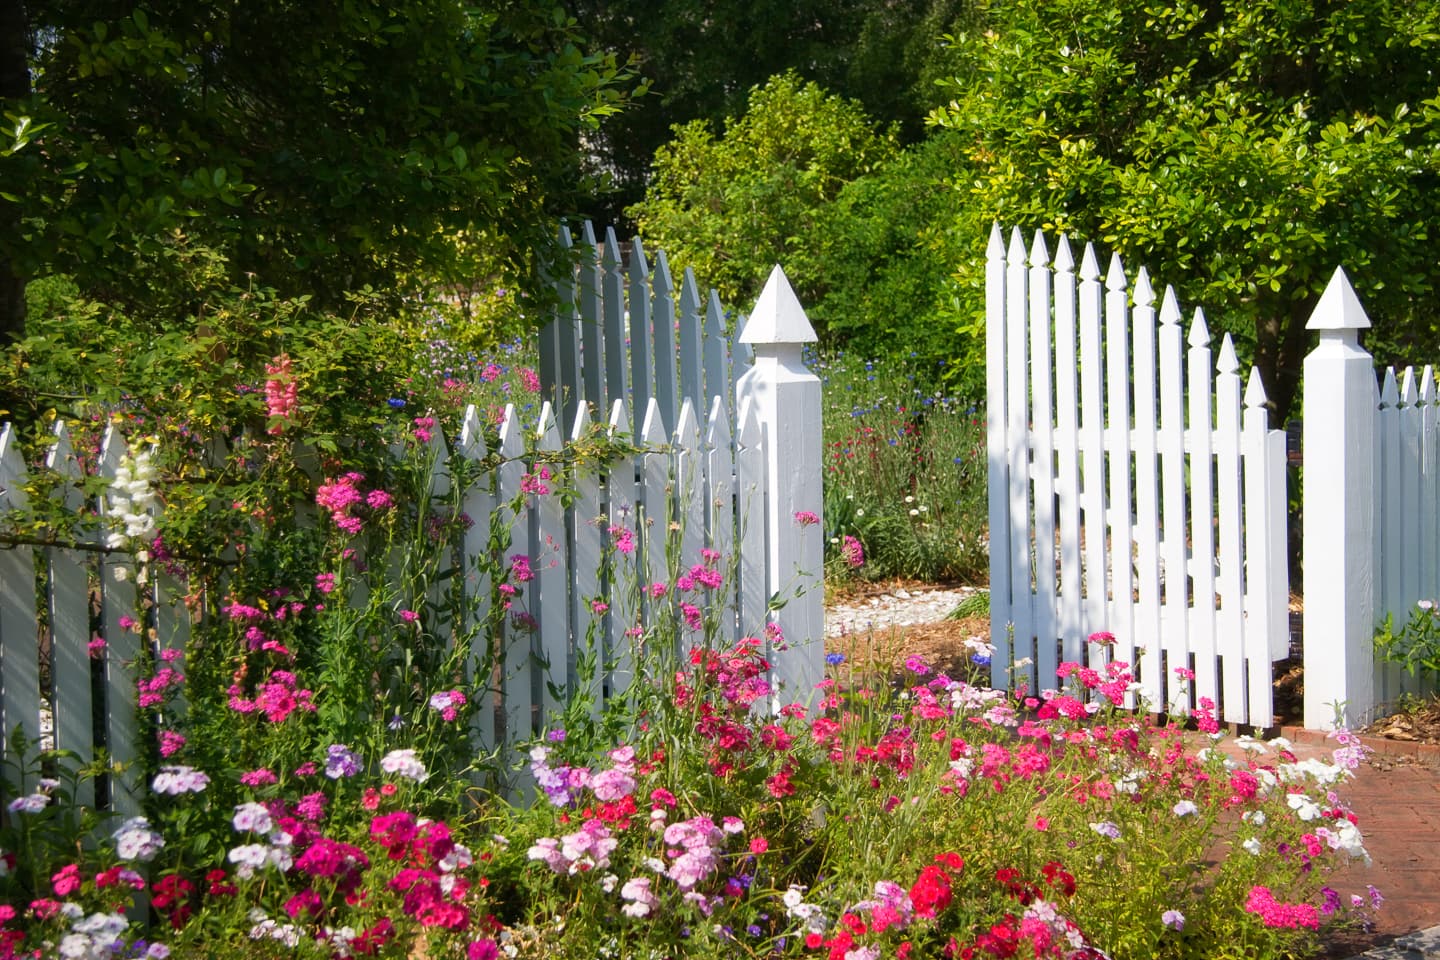 A white picket fence and gate in a garden with flowers.